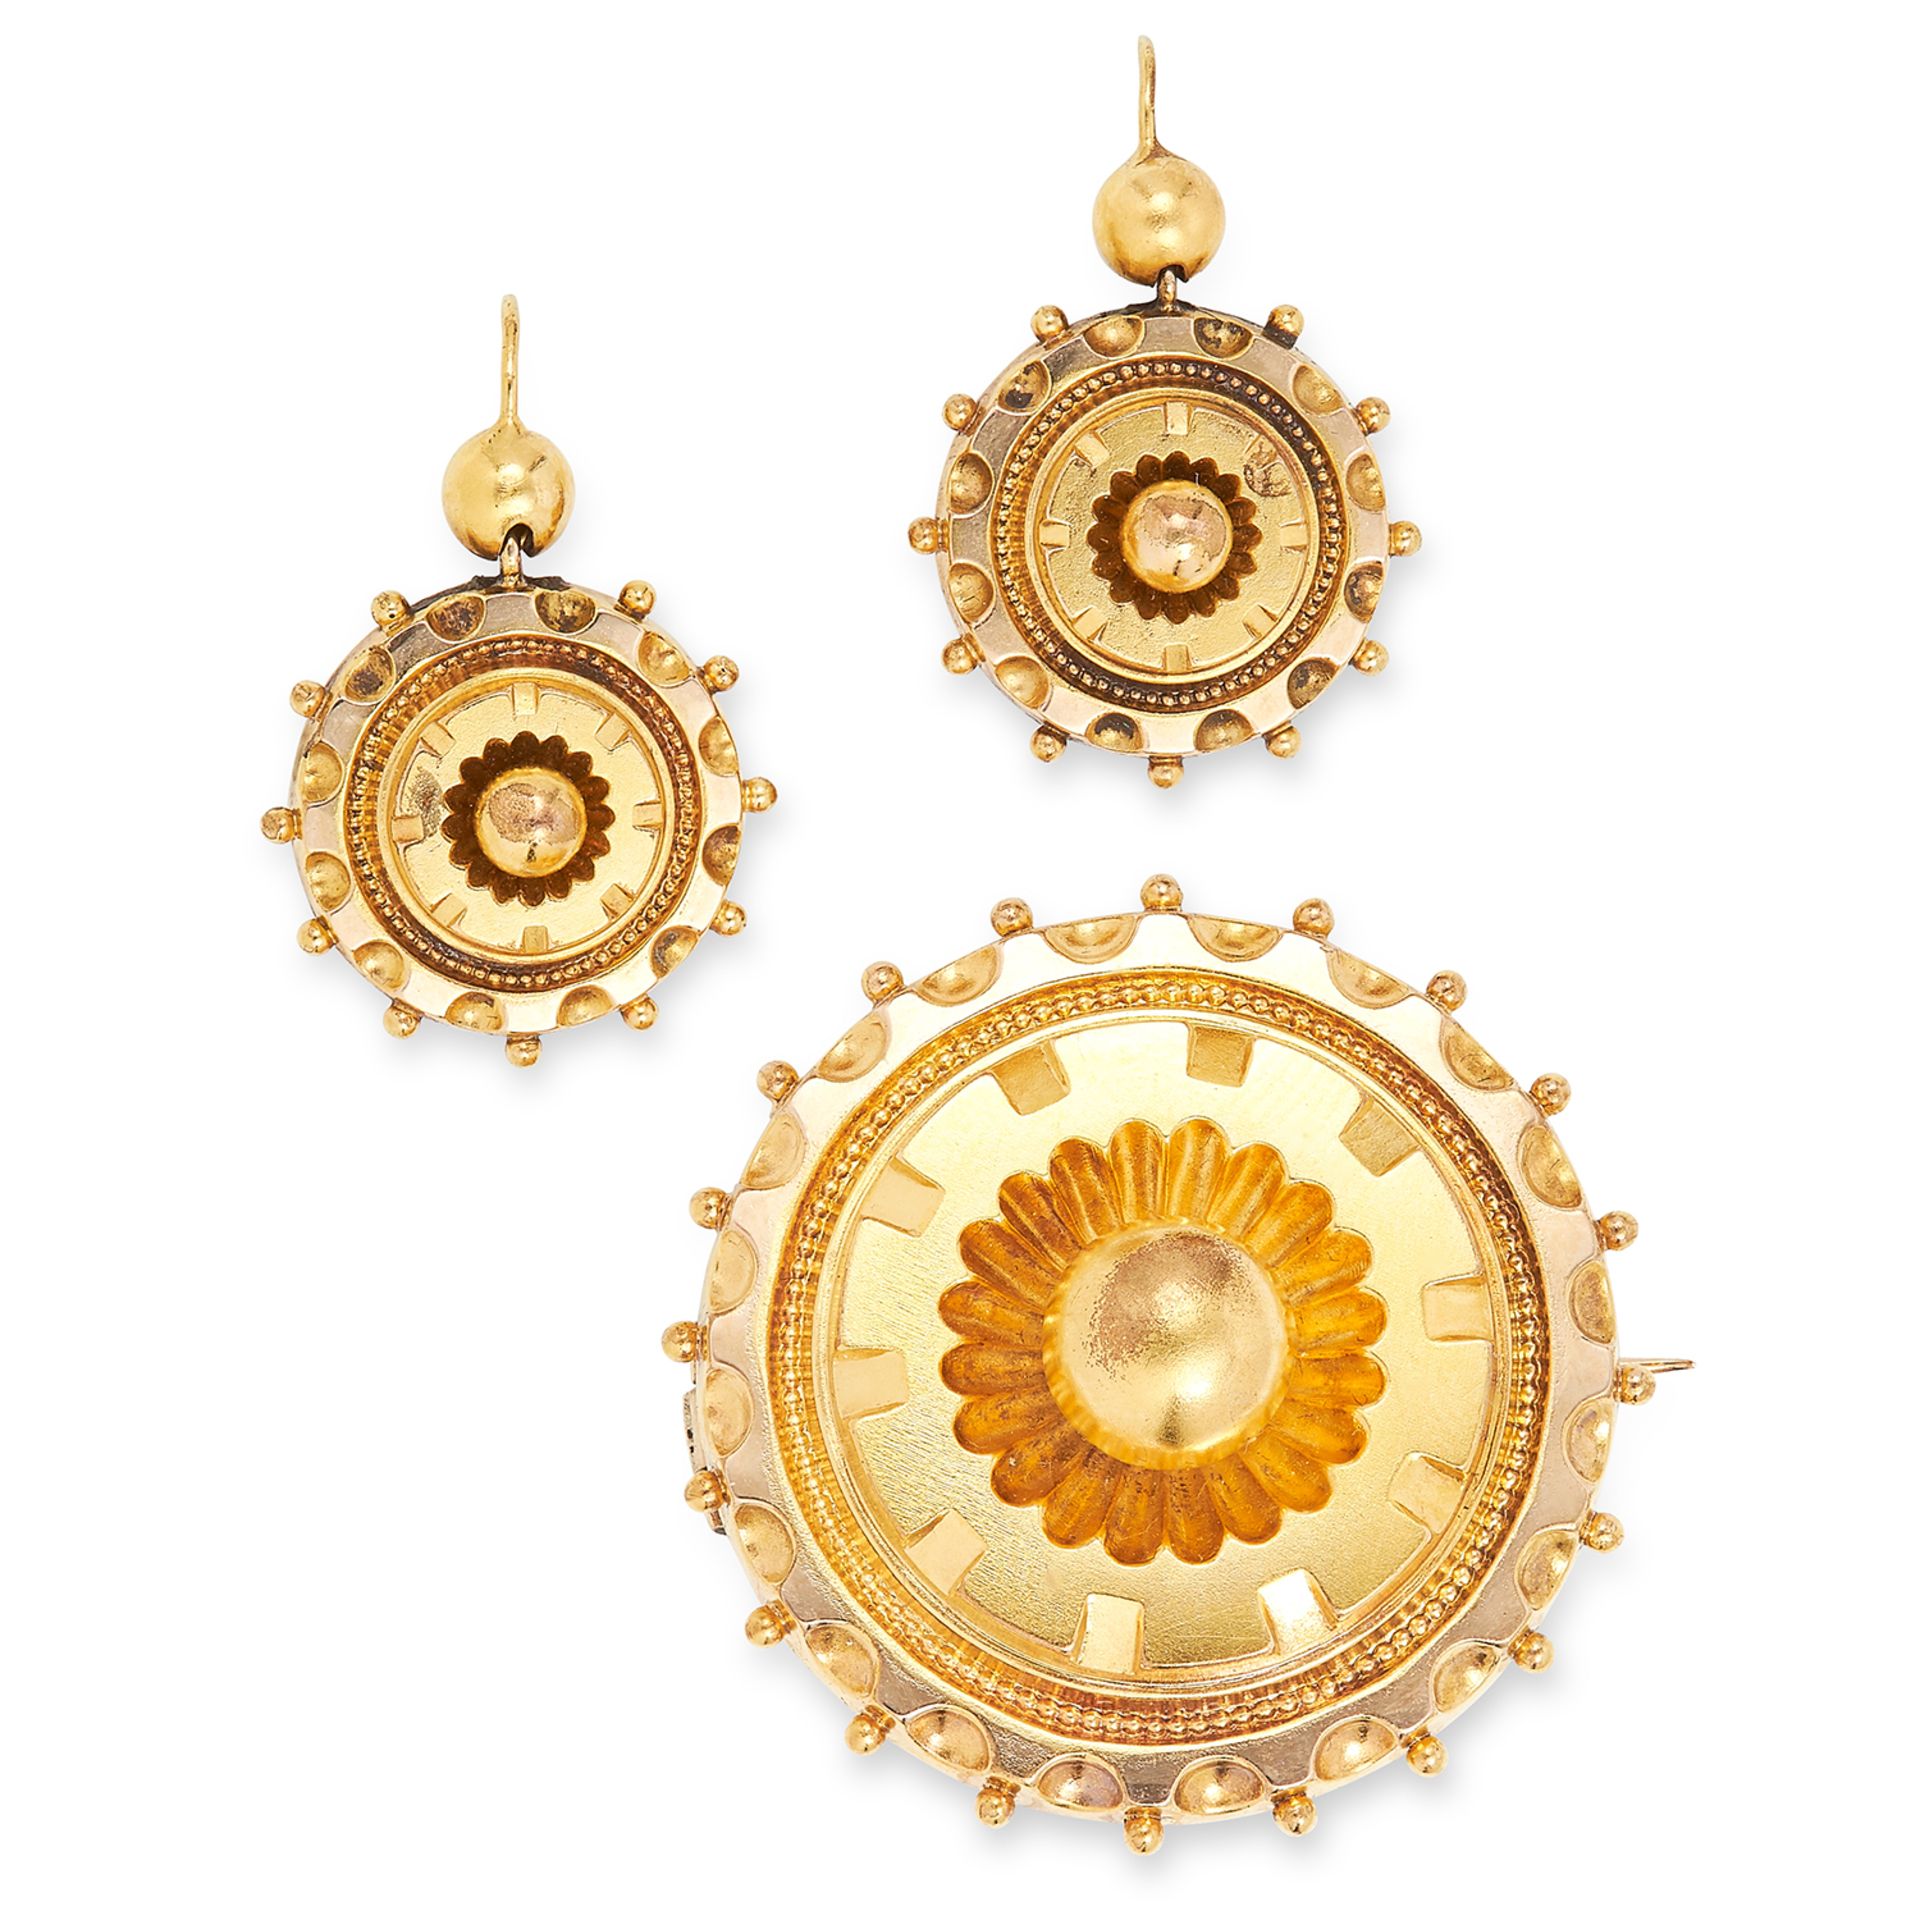 ANTIQUE MOURNING BROOCH AND EARRINGS SUITE, 19TH CENTURY circular design with geometric accents, the